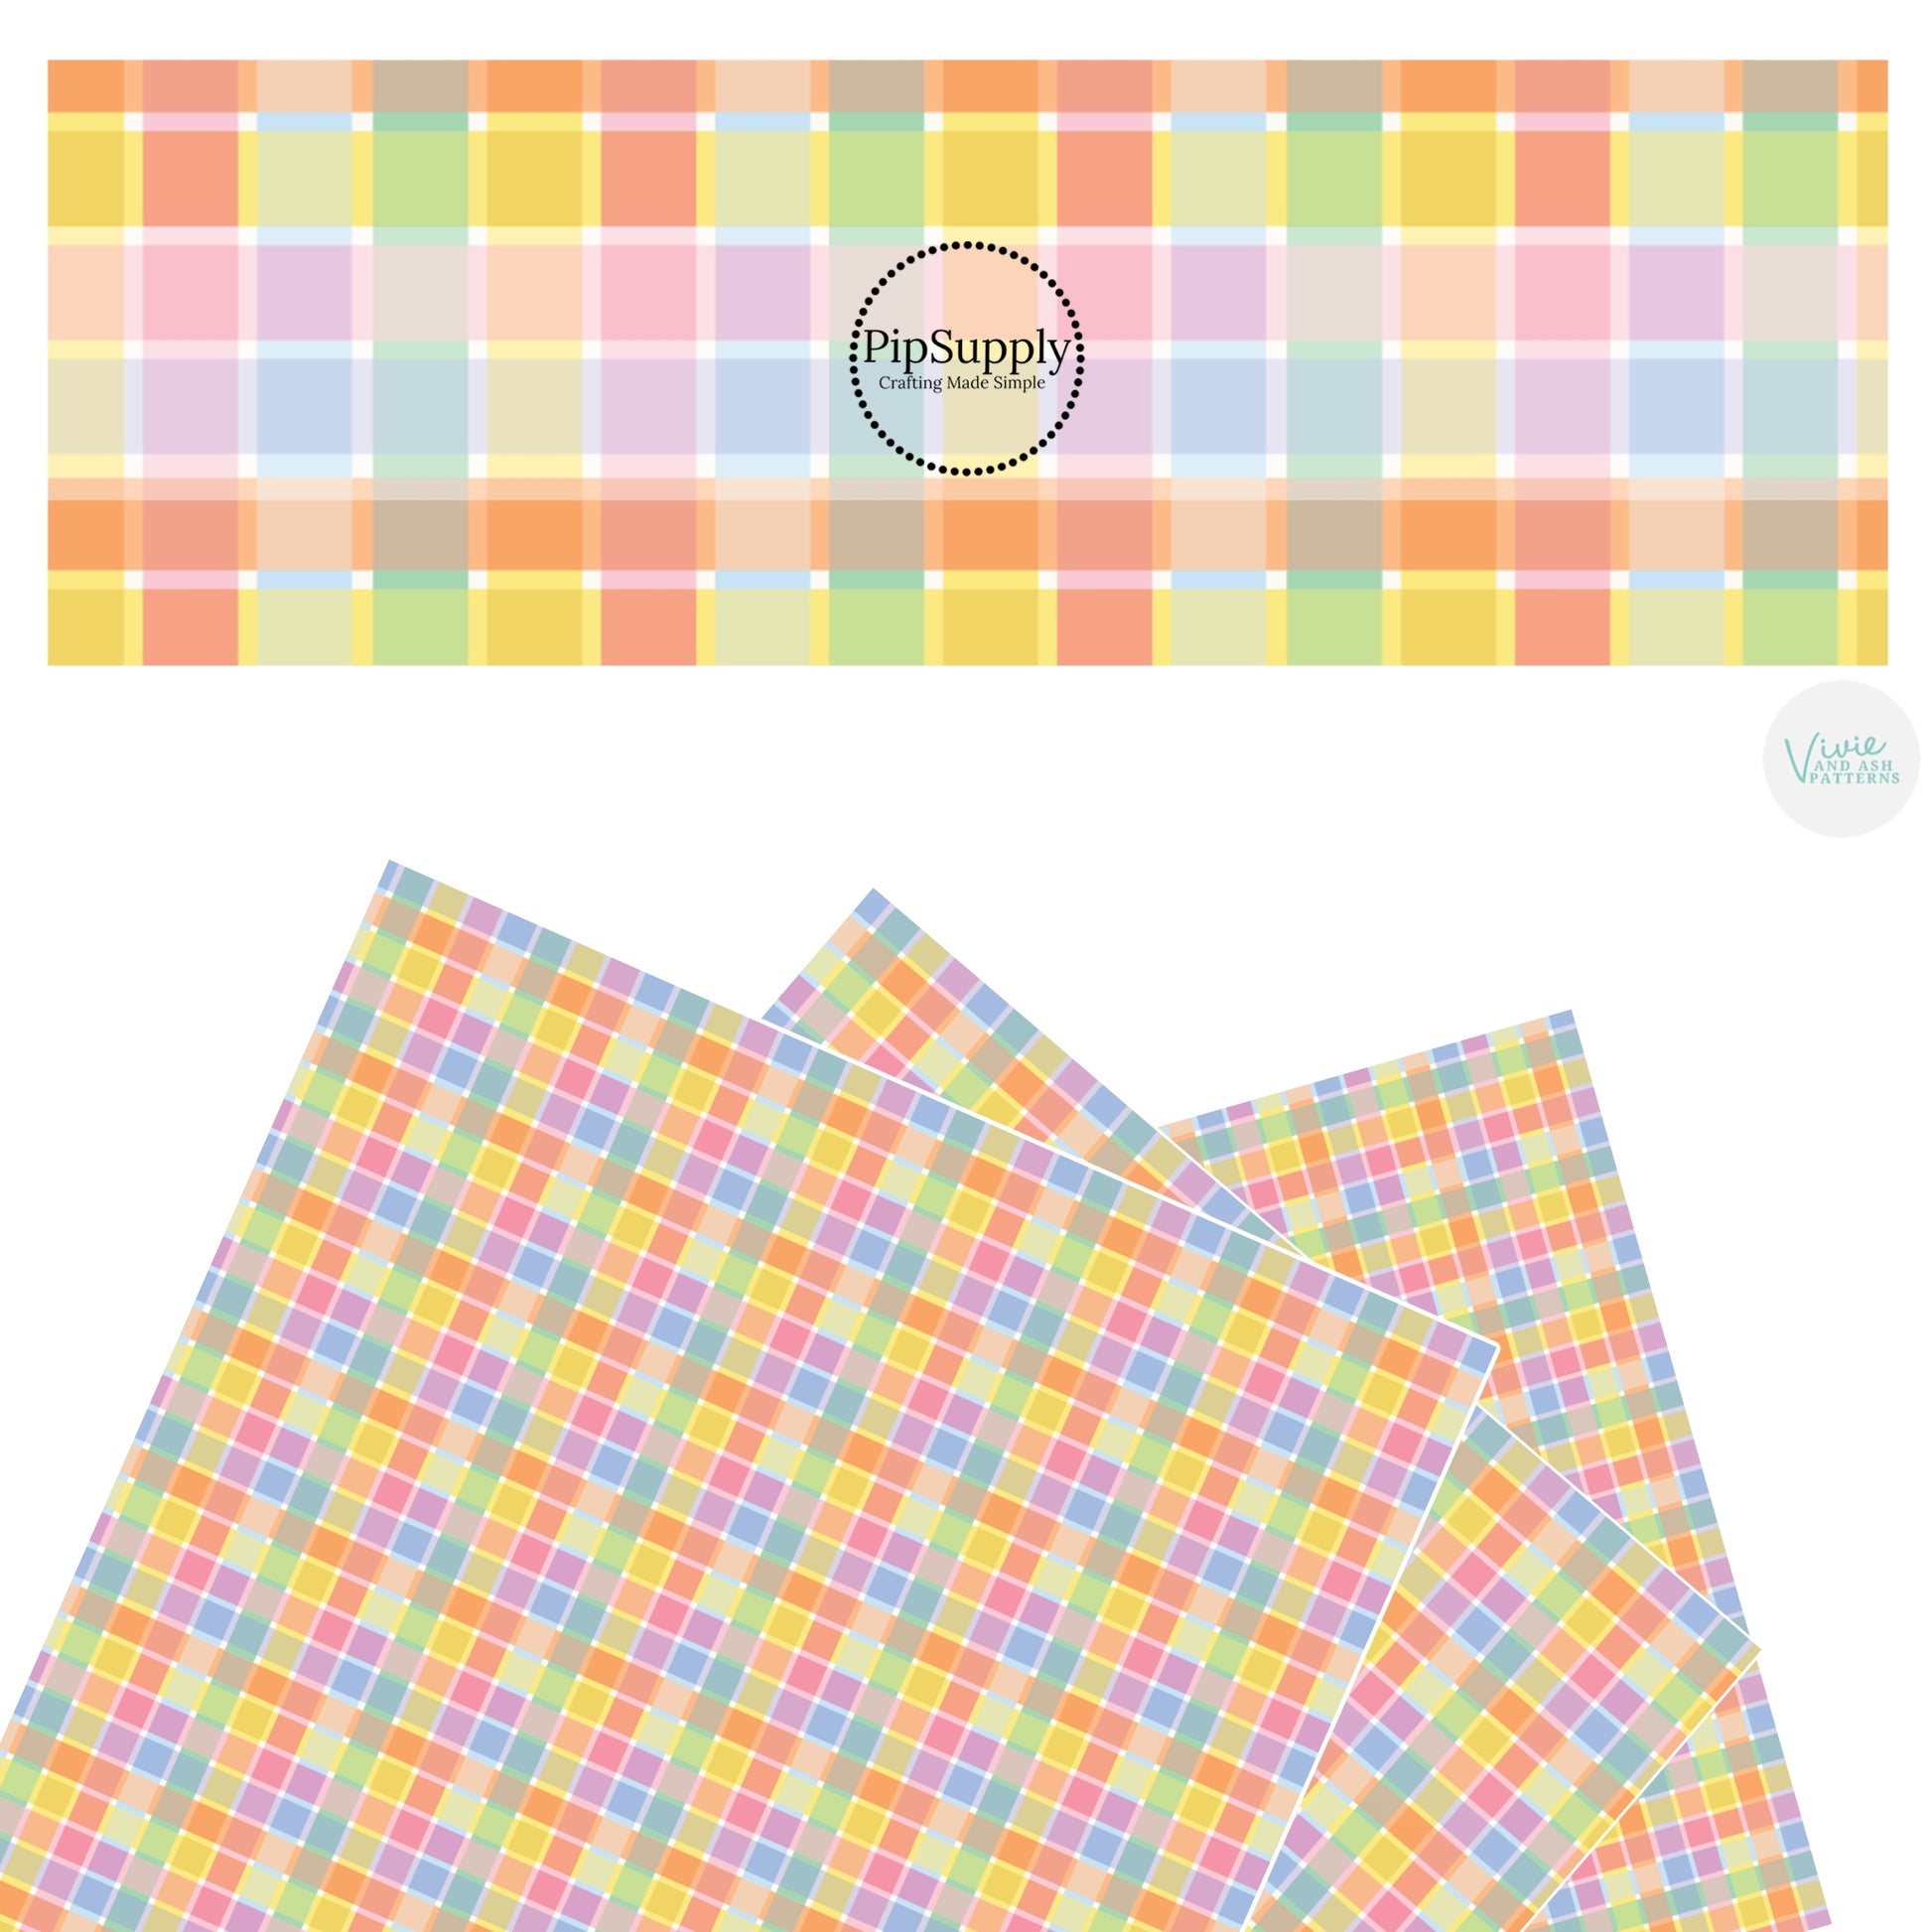 These spring pastel pattern themed faux leather sheets contain the following design elements: light pink, light blue, light green, and yellow plaid pattern. Our CPSIA compliant faux leather sheets or rolls can be used for all types of crafting projects.